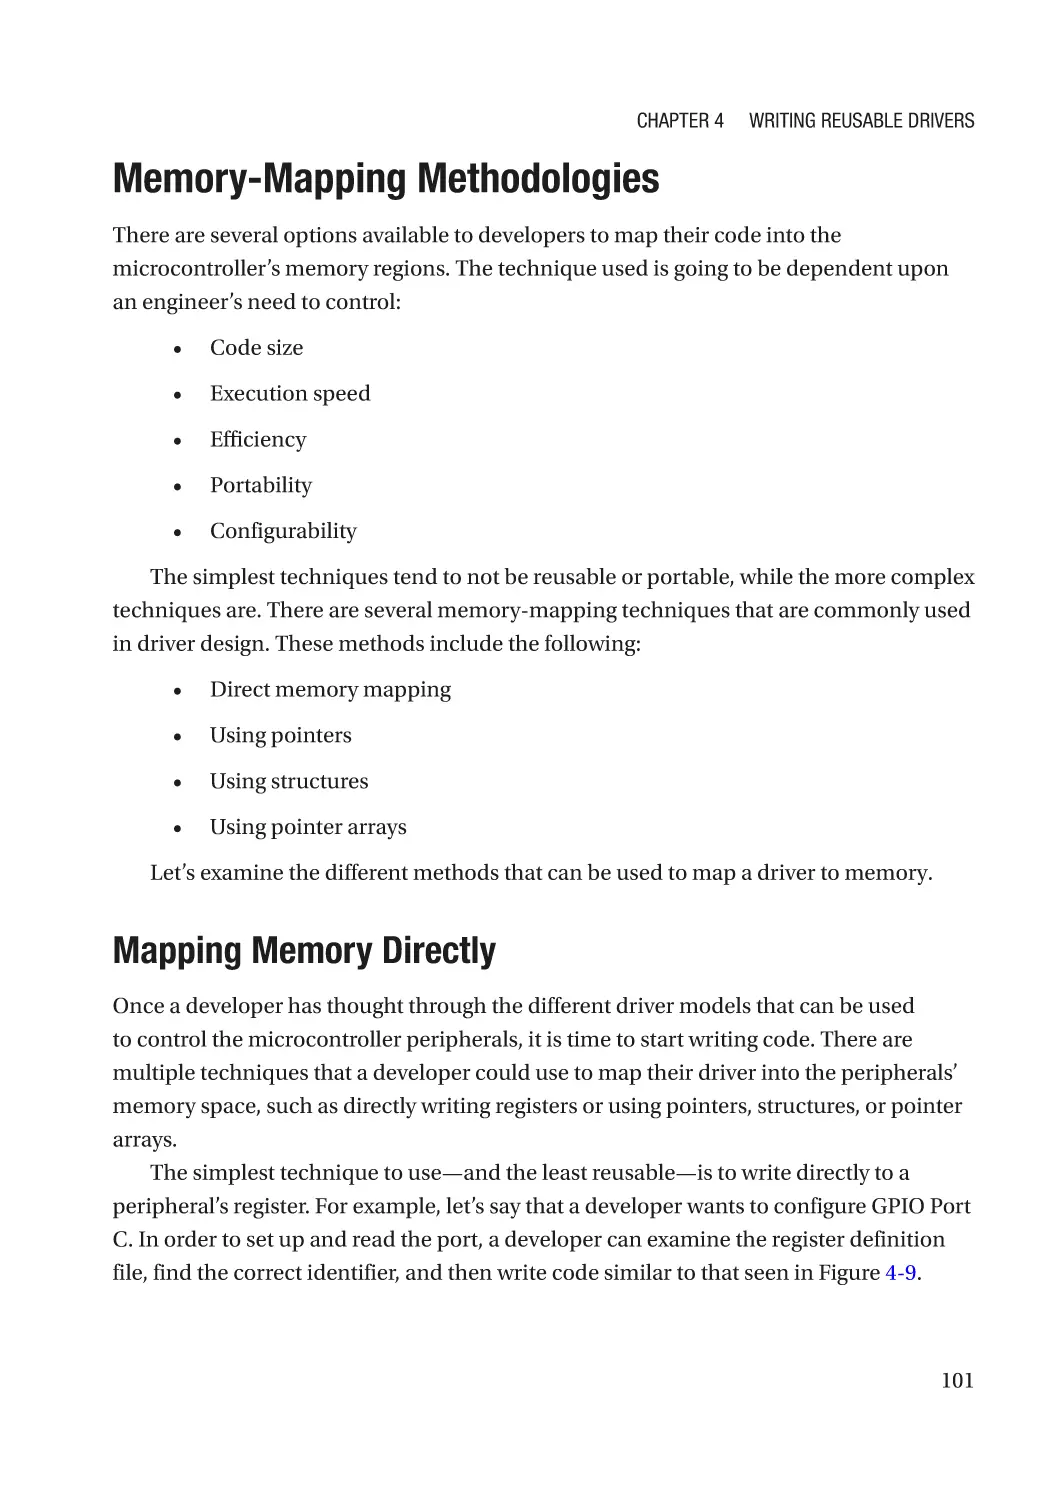 Memory-Mapping Methodologies
Mapping Memory Directly